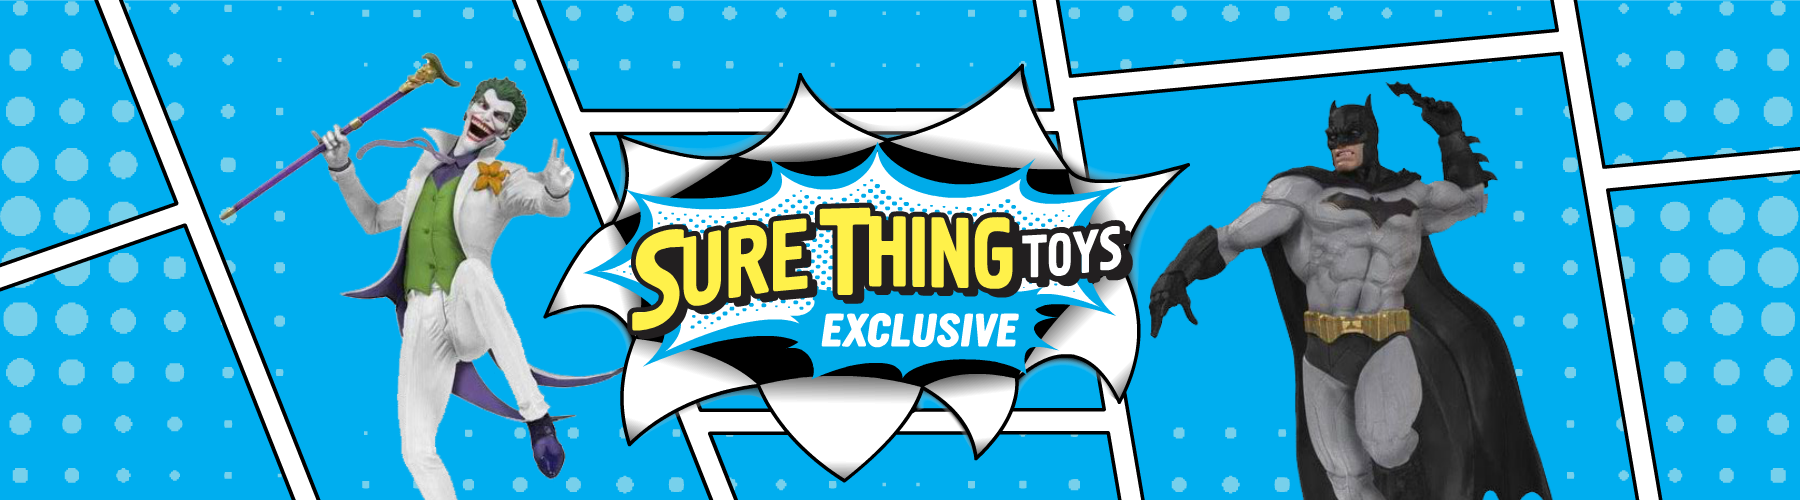 Sure Thing Toys Banner